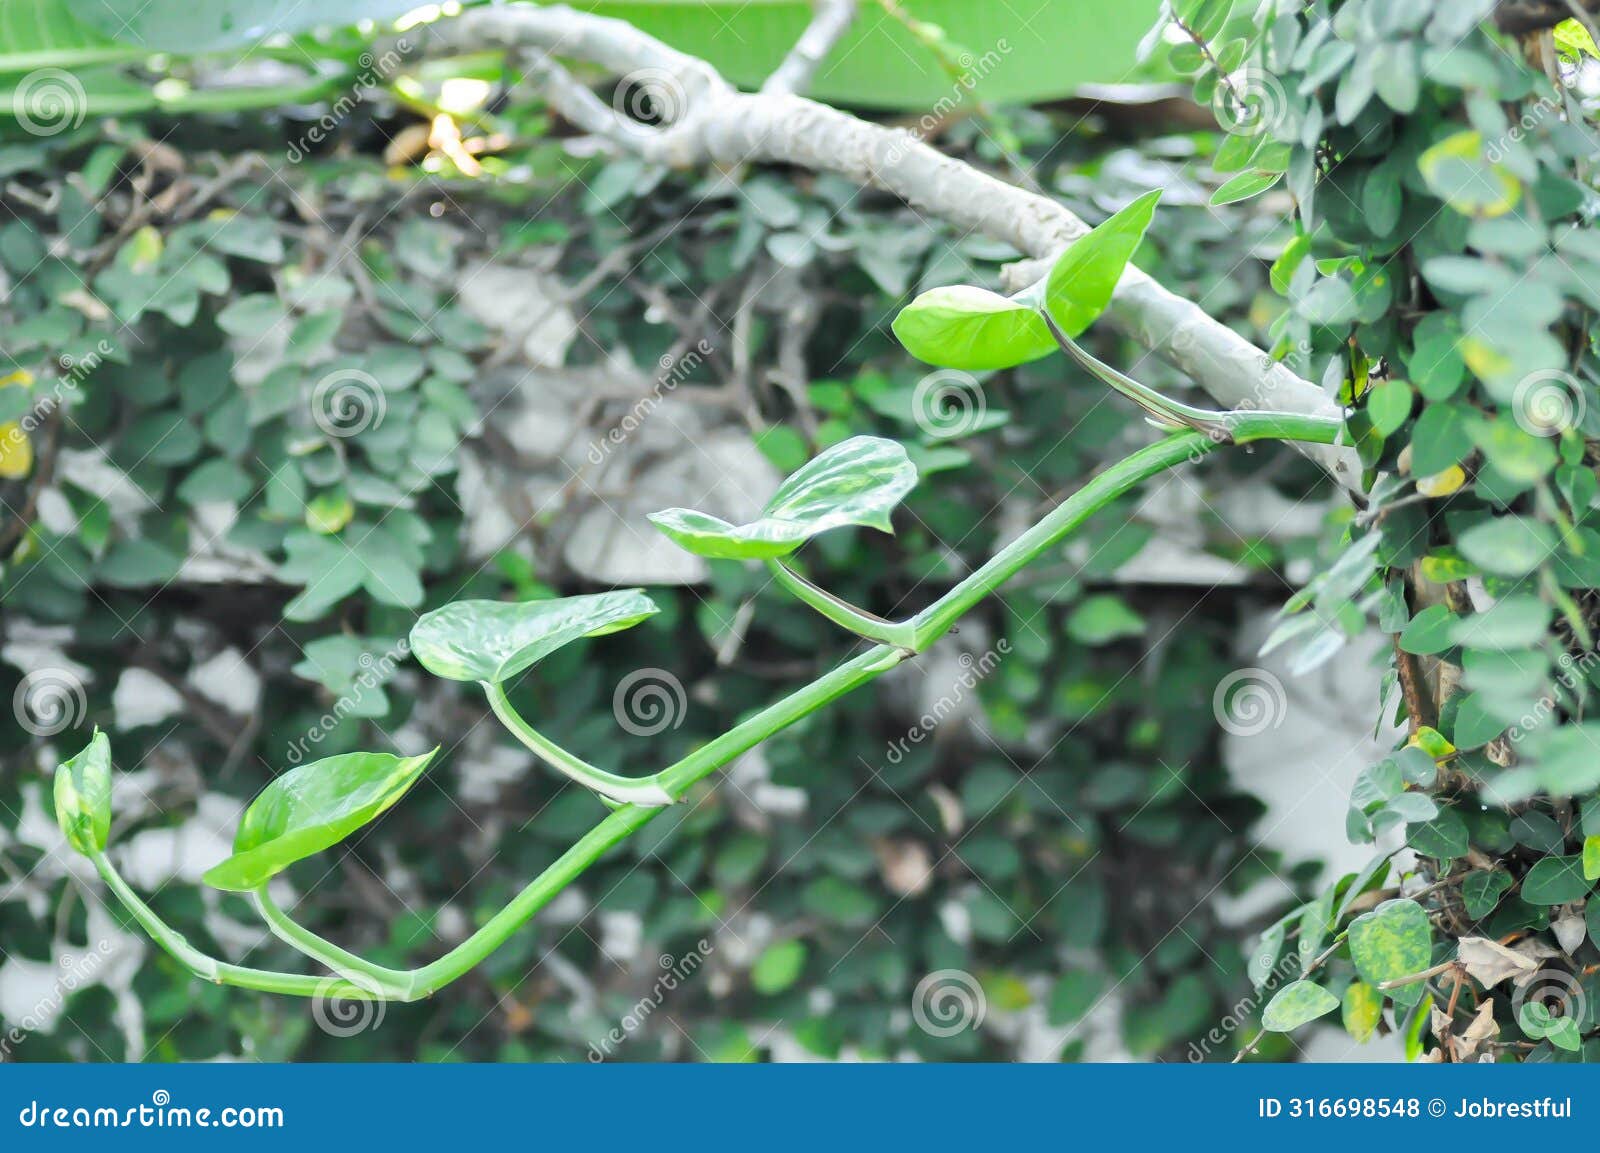 devils ivy, golden pothos or hunters robe or epipremnum aureum or araceae and ficus pumila or climbing fig on the wall